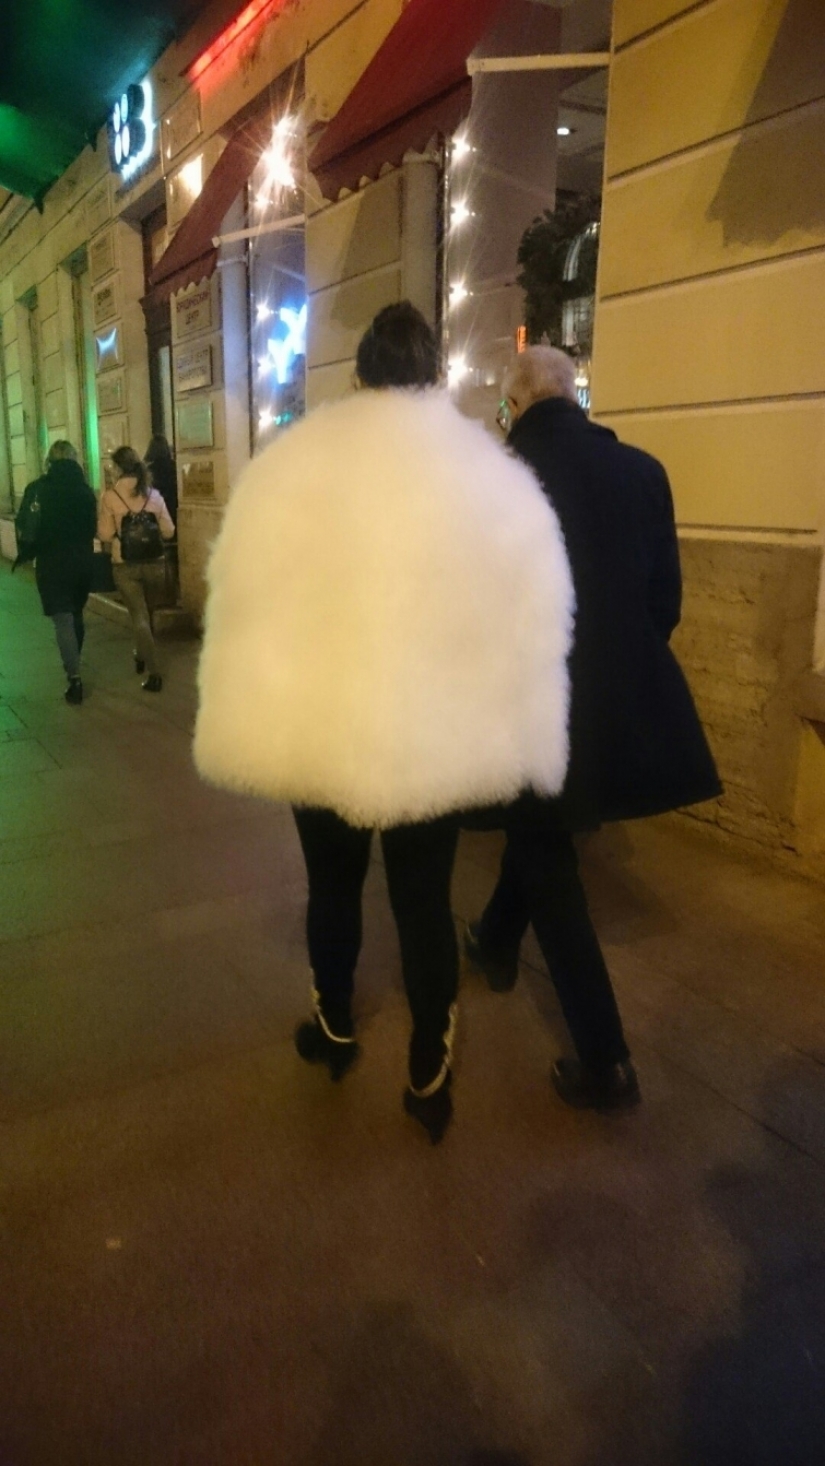 Intelligent madness, or the Strange fashion of the St. Petersburg streets